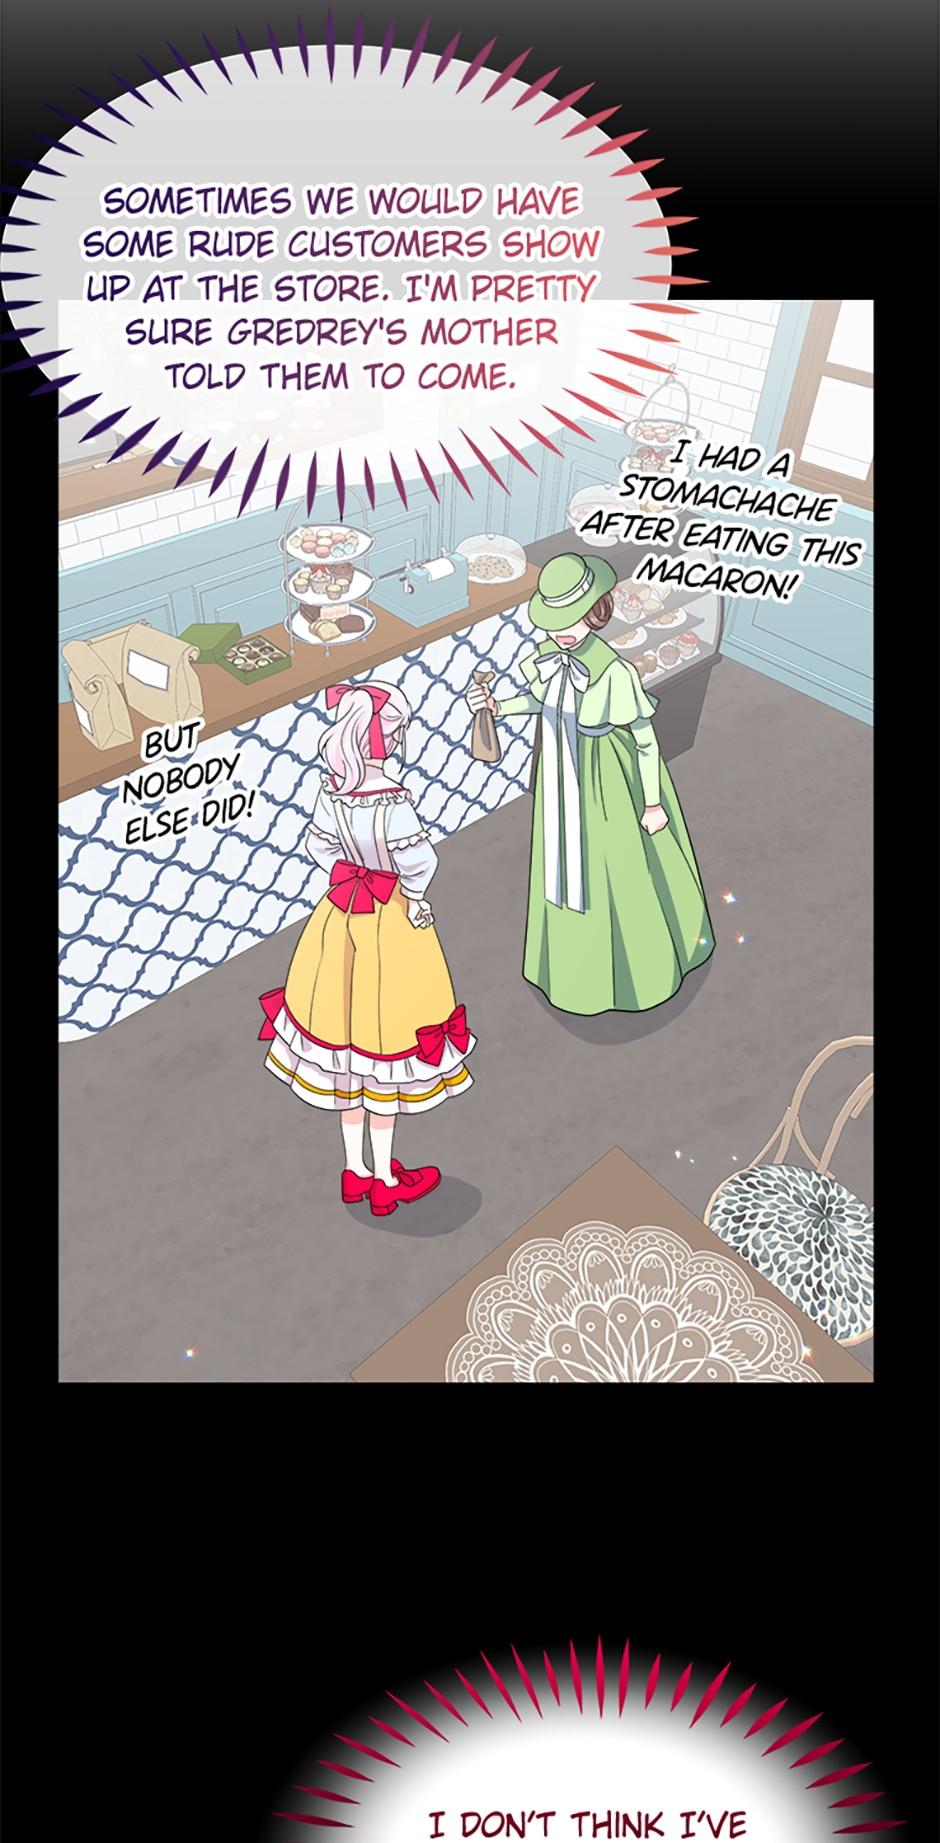 She came back and opened a dessert shop chapter 22